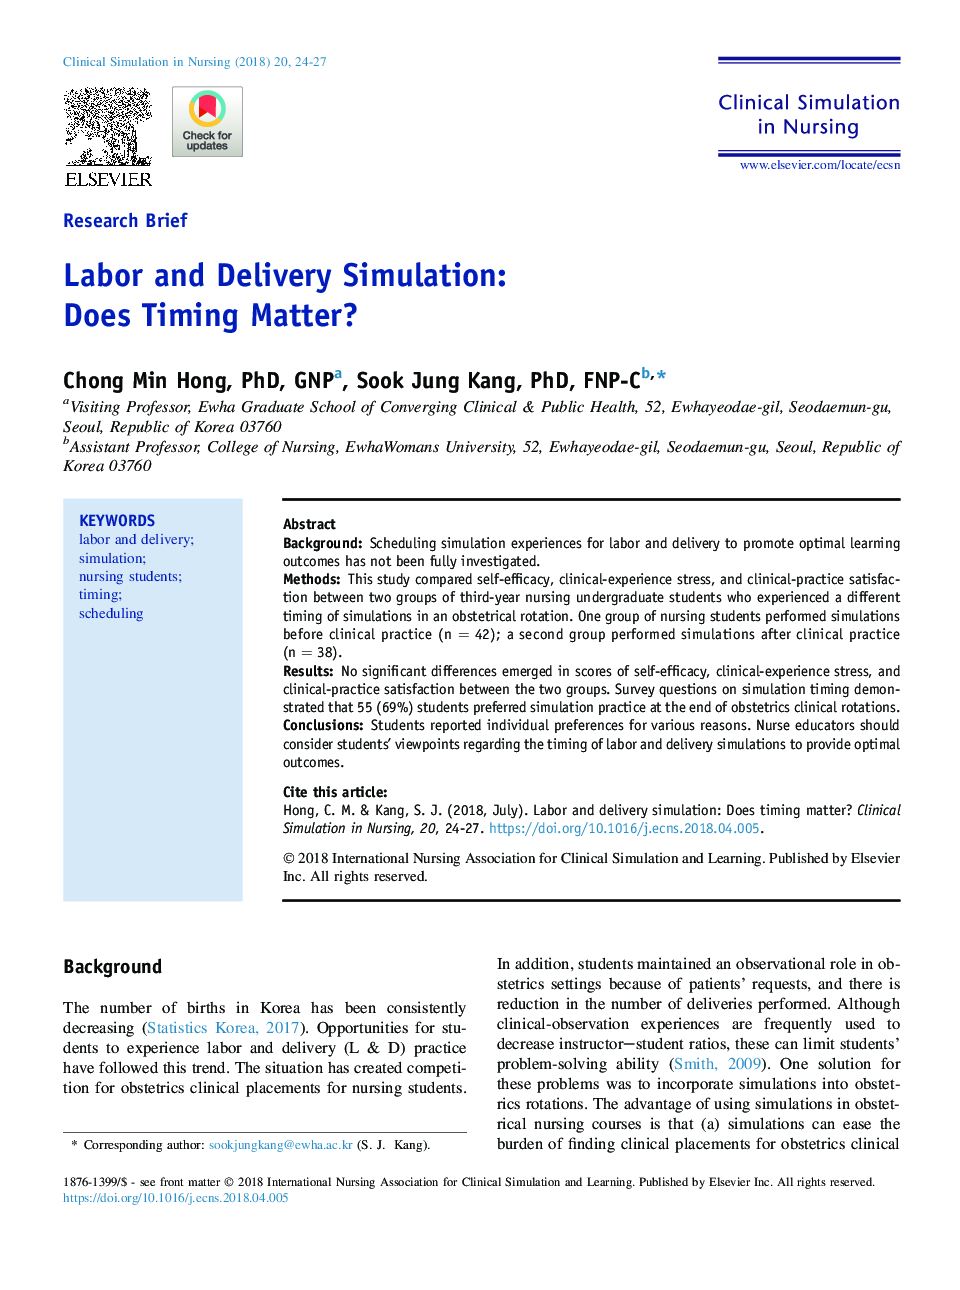 Labor and Delivery Simulation: Does Timing Matter?